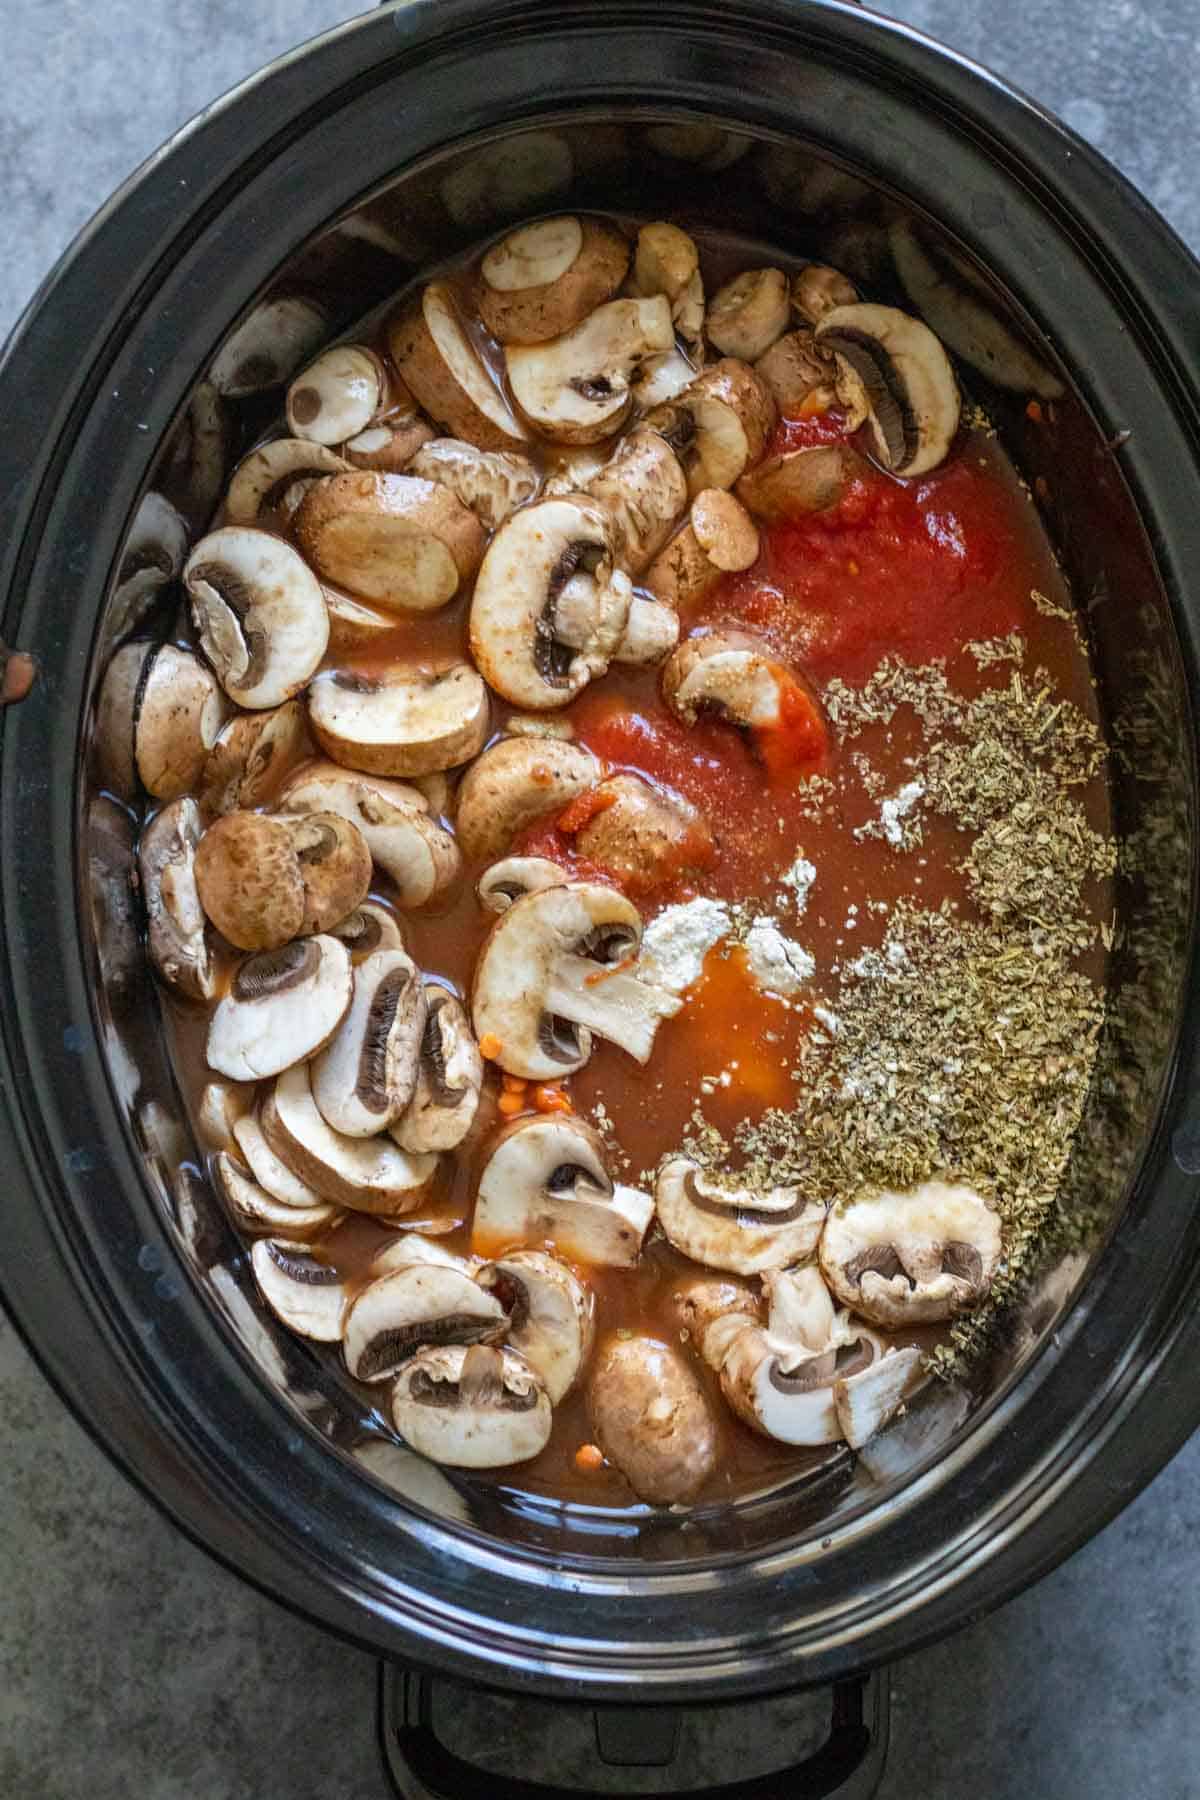 Soup ingredients mixed into the crockpot before cooking.